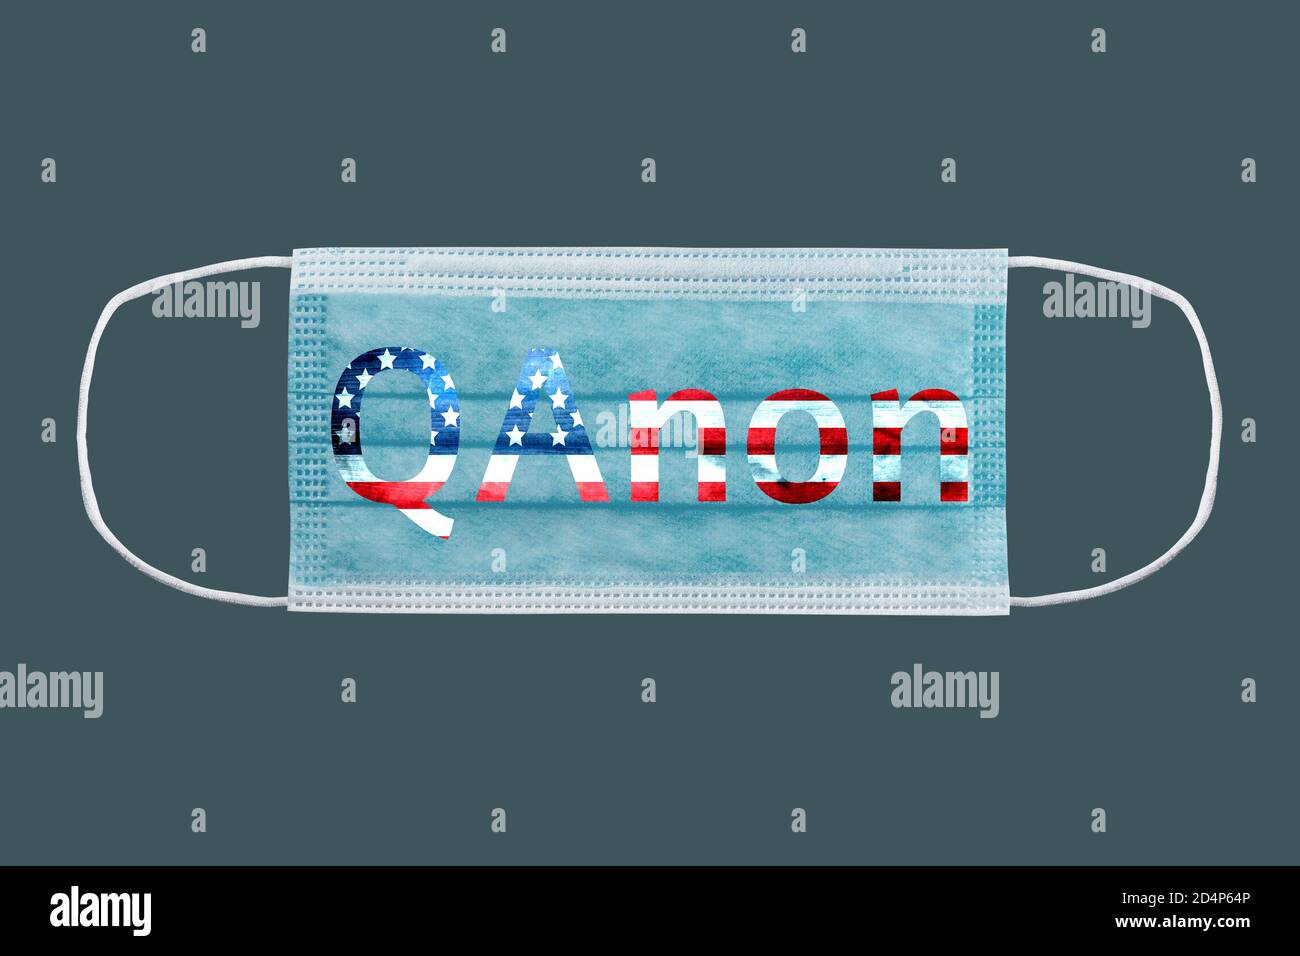 Qanon deep state conspiracy text on Medical surgical mask American flag. Stock Photo